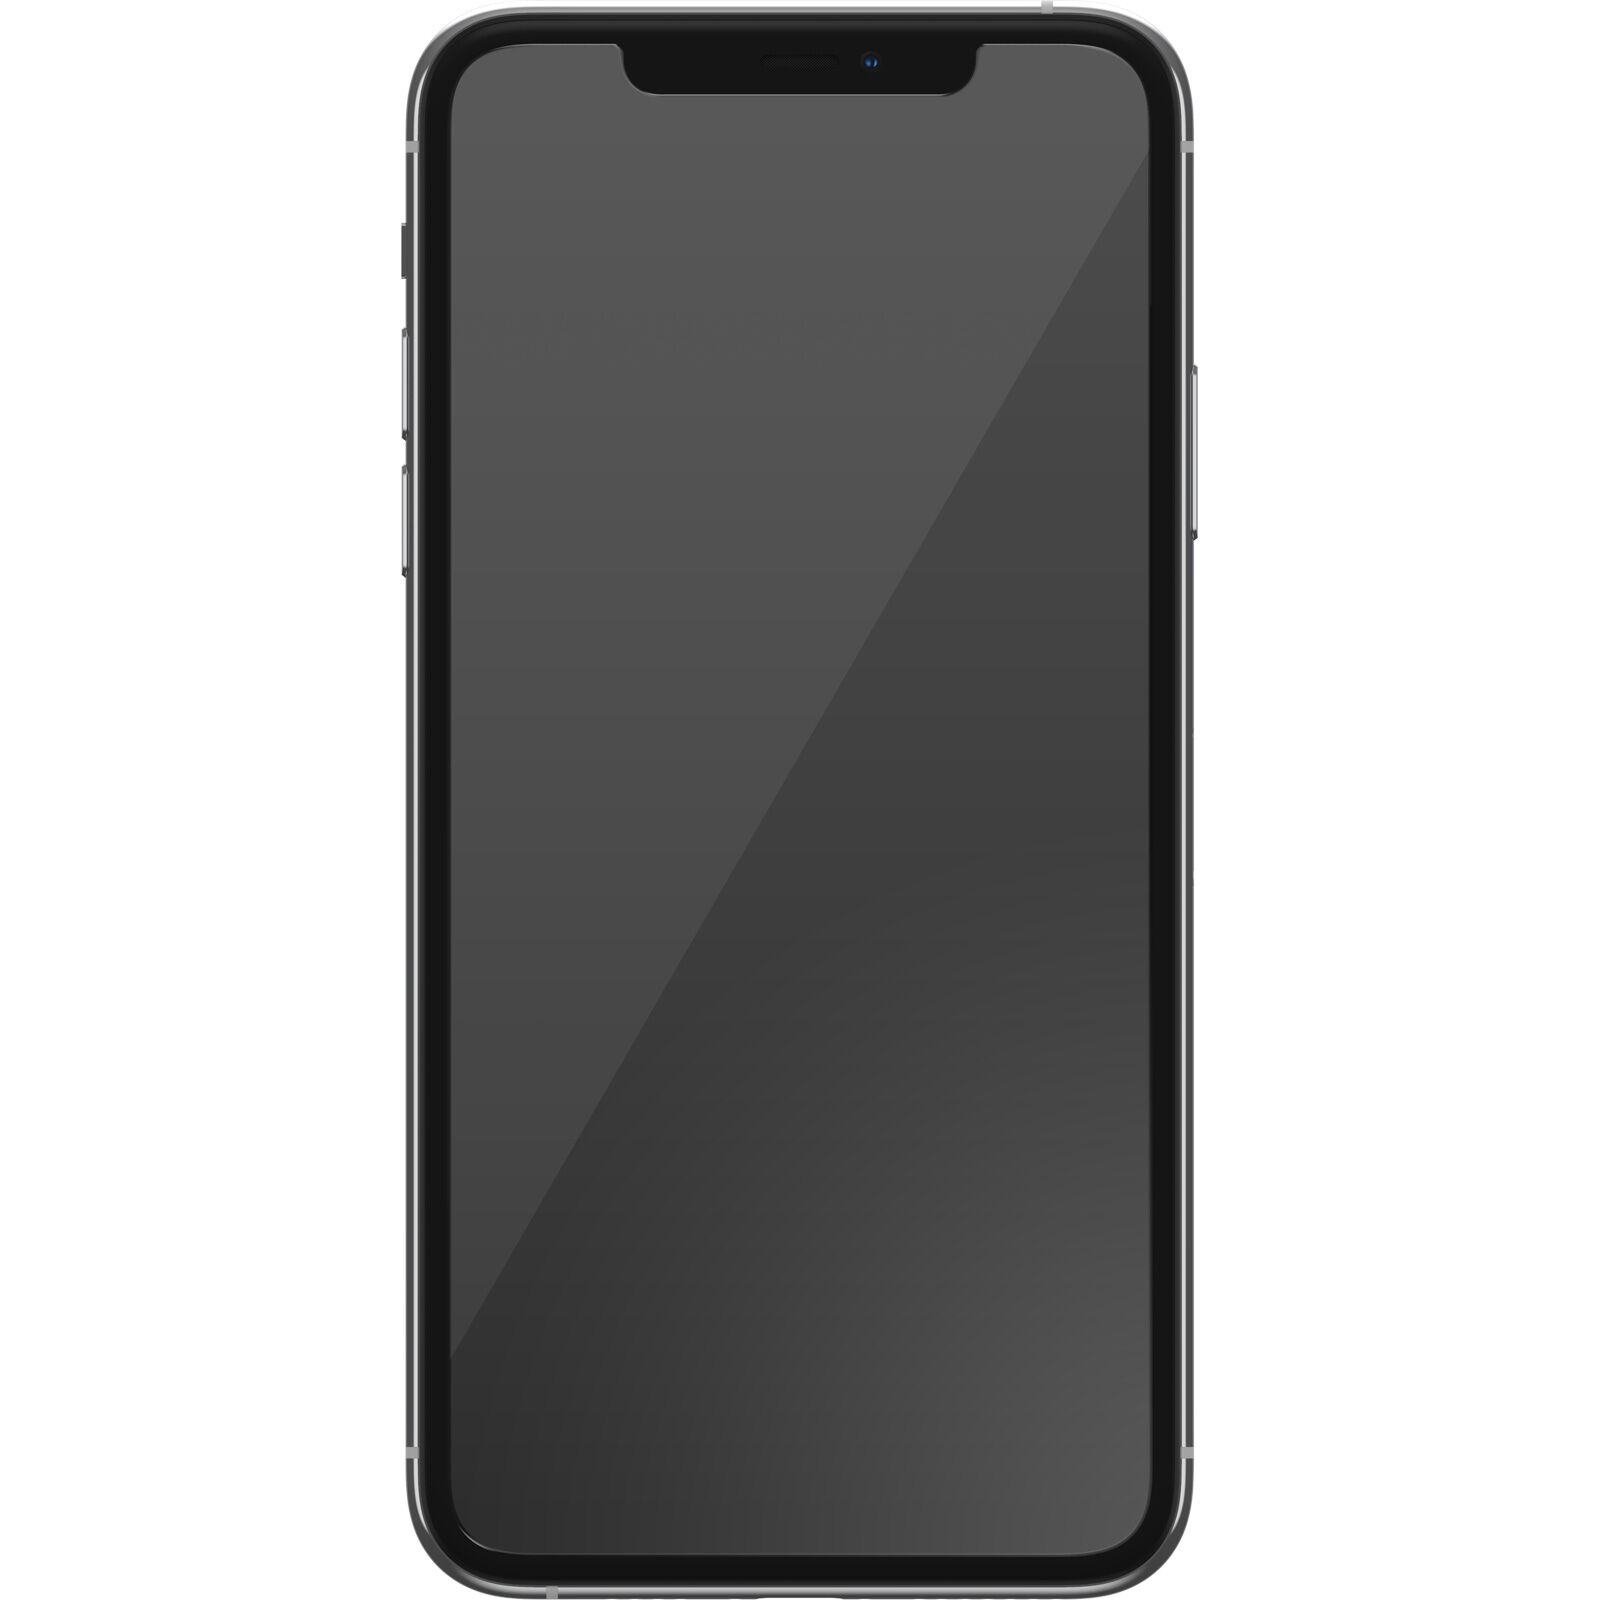 Clear iPhone 11 Pro Max Case | OtterBox Symmetry Series Clear Cases